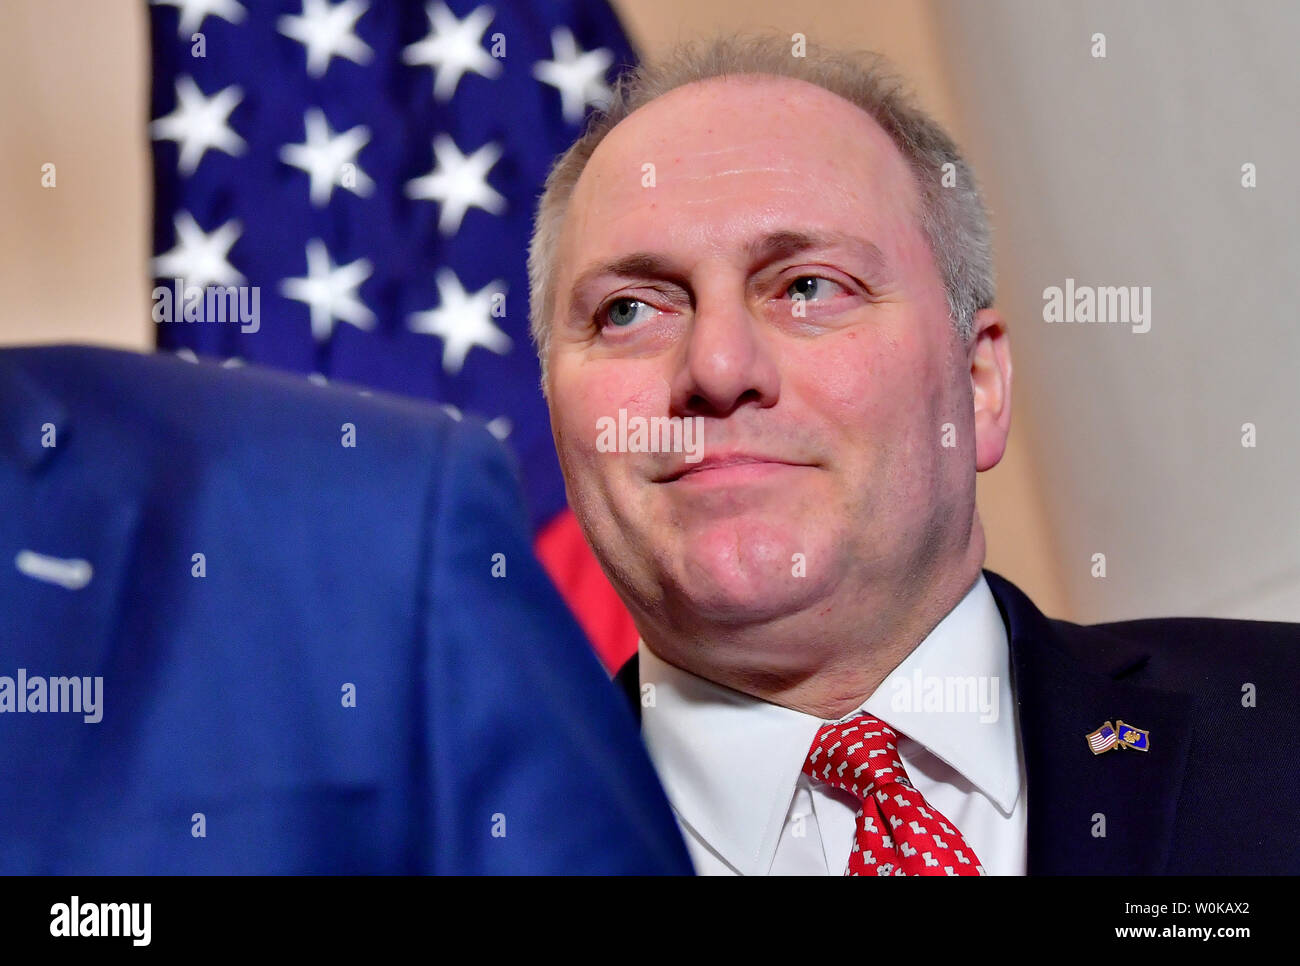 House Majority Whip Steve Scalise, R-LA, attends a press conference following the House Republican leadership elections after he was elected as minority whip for the 116th Congress, at the U.S. Capitol in Washington, D.C. on November 14, 2018. Rep. Kevin McCarthy, D-CA was elected to serve as the House Minority Leader, Rep. Gary Palmer, R-AL, was elected as Republican Policy Committee chairman, Rep. Liz Cheney, R-WY was elected as Republican Conference Chair, Rep. Jason Smith, R-MO was elected as Republican Conference Secretary, and Rep. Mark Walker (R-N.C.) was elected as Republican Conferenc Stock Photo